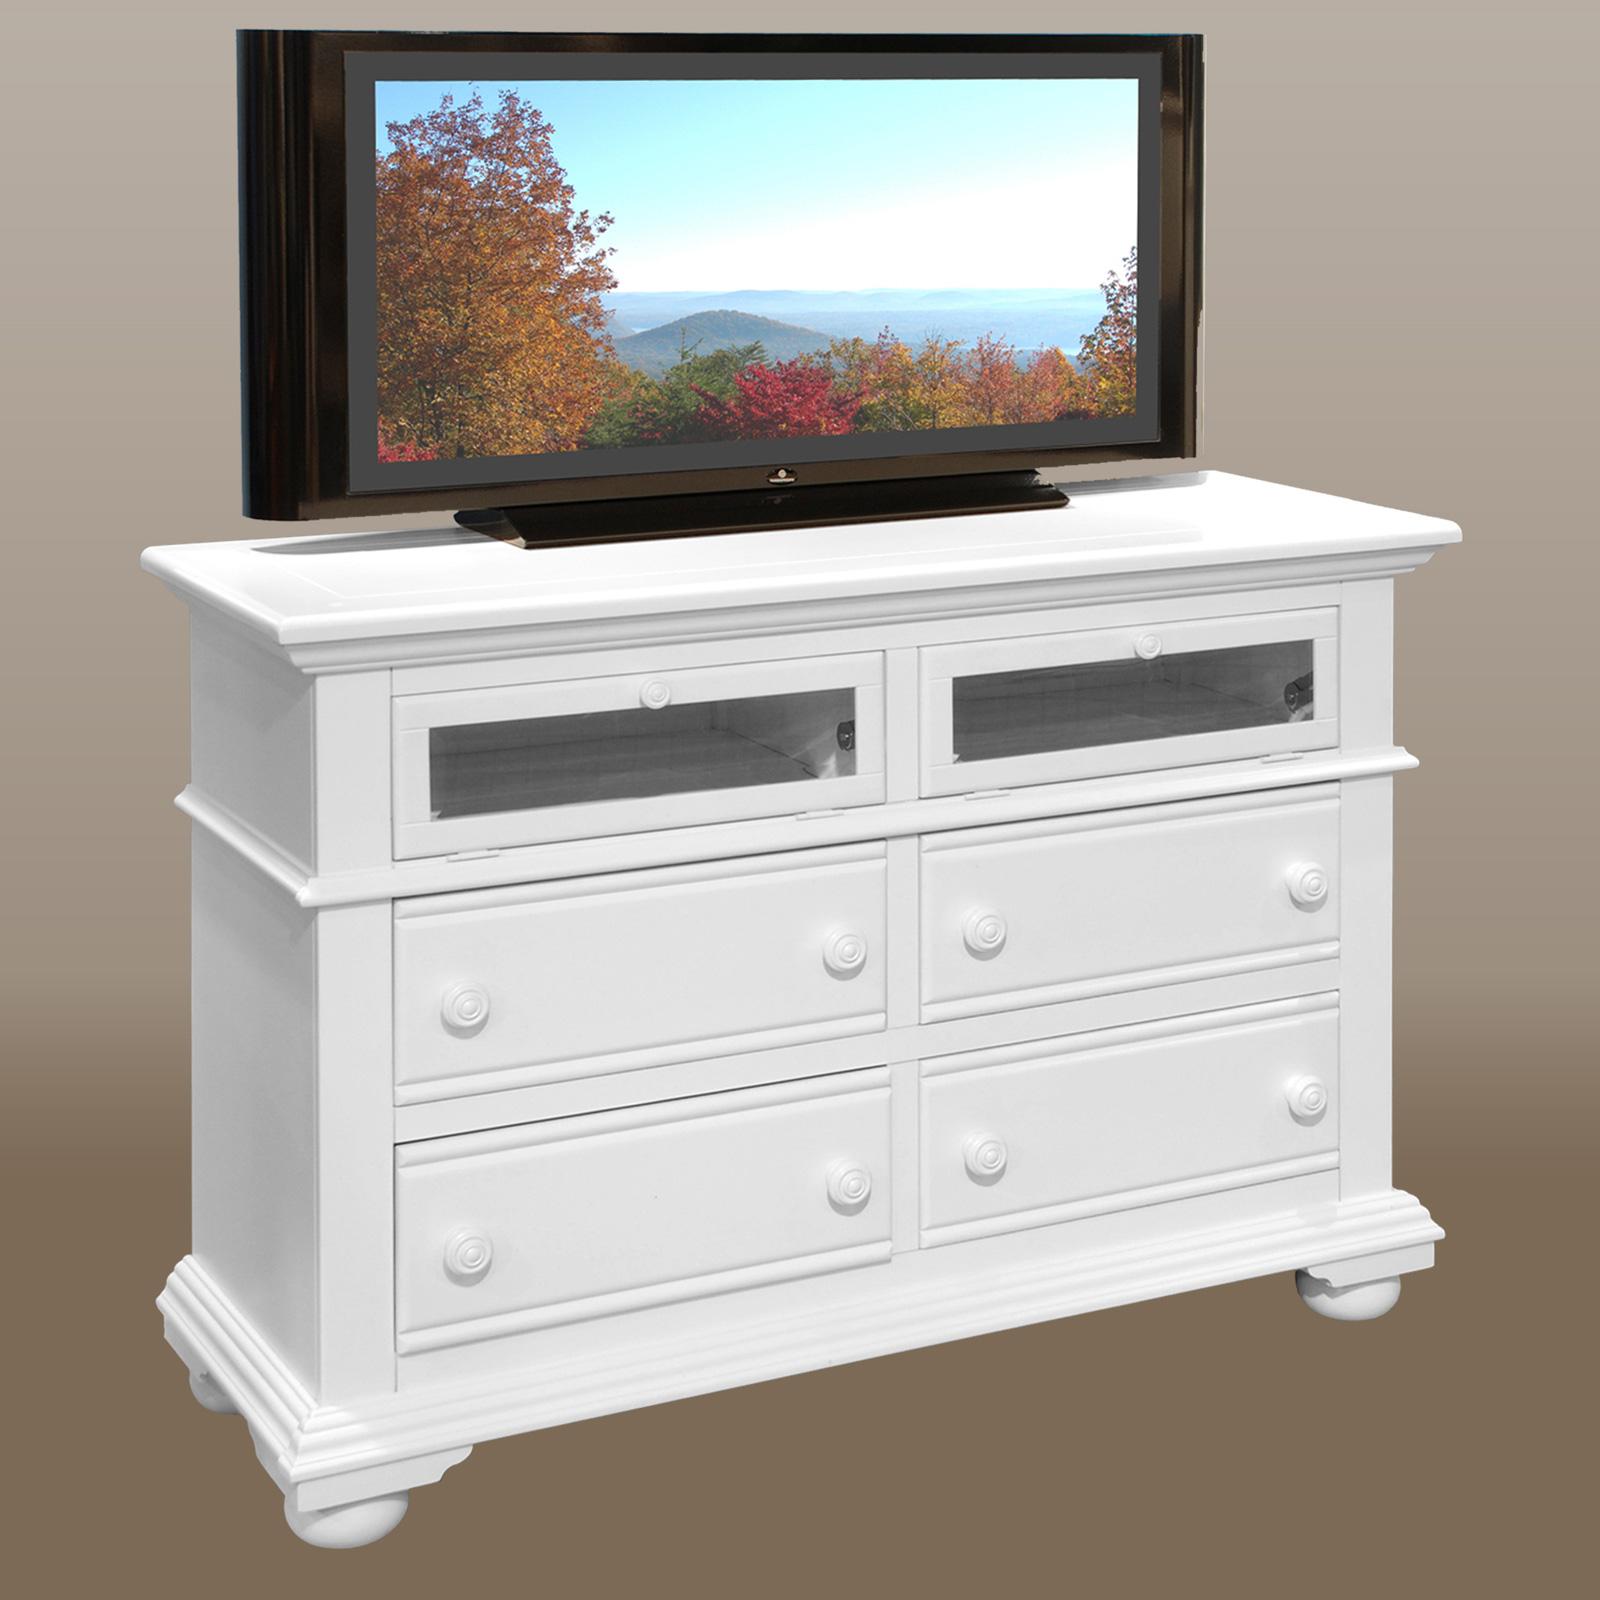 Cottage Entertainment Chest COTTAGE 6510-232 6510-232 in White 